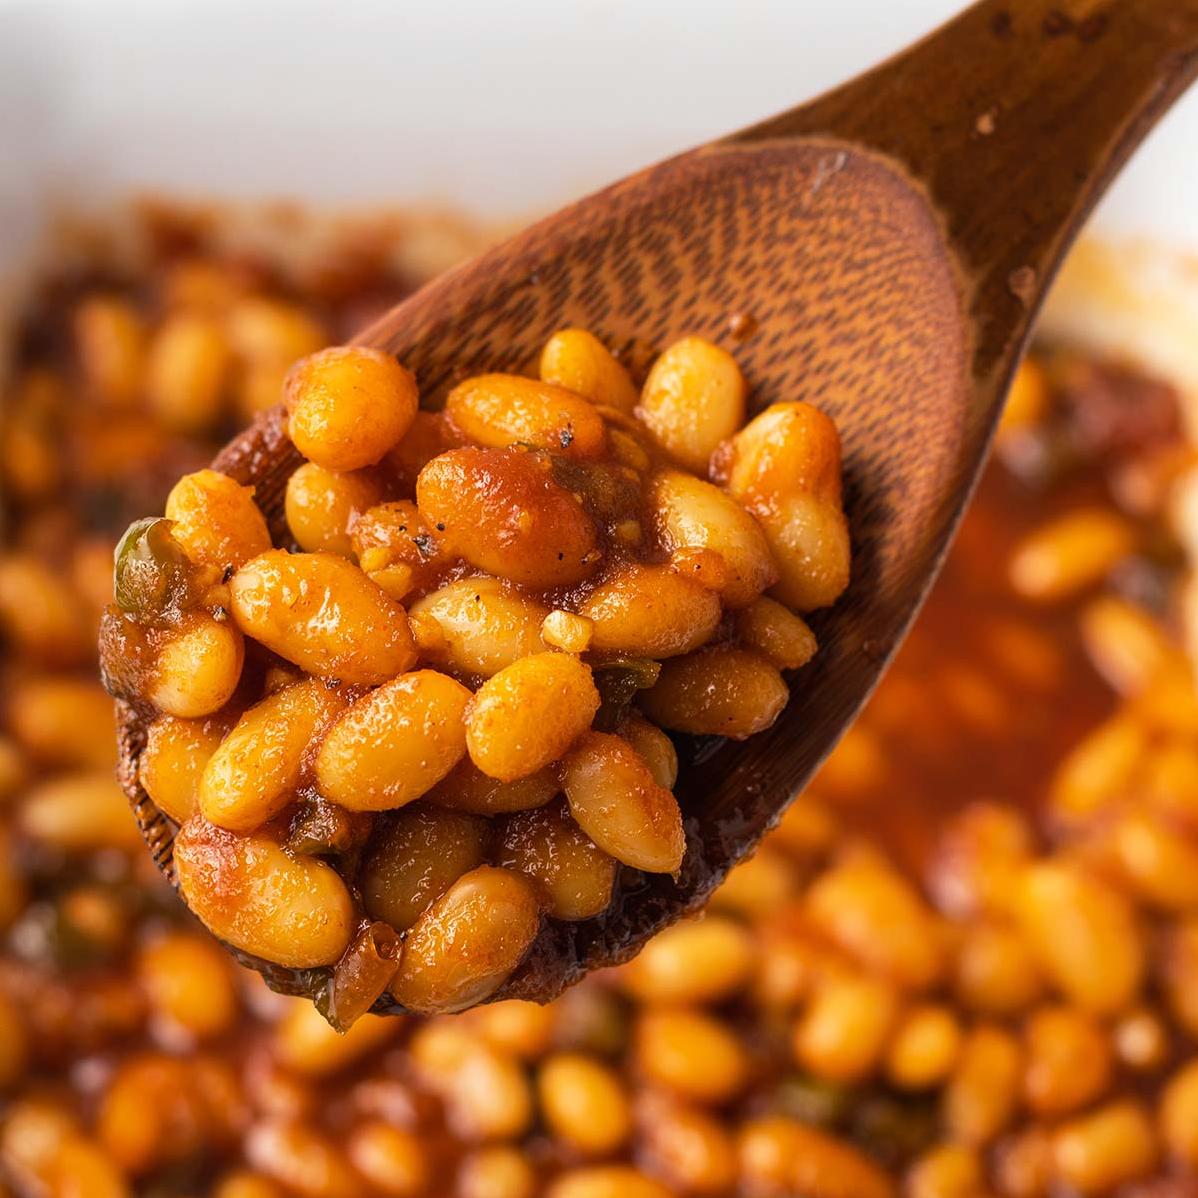  Ready to spice up your bean game?